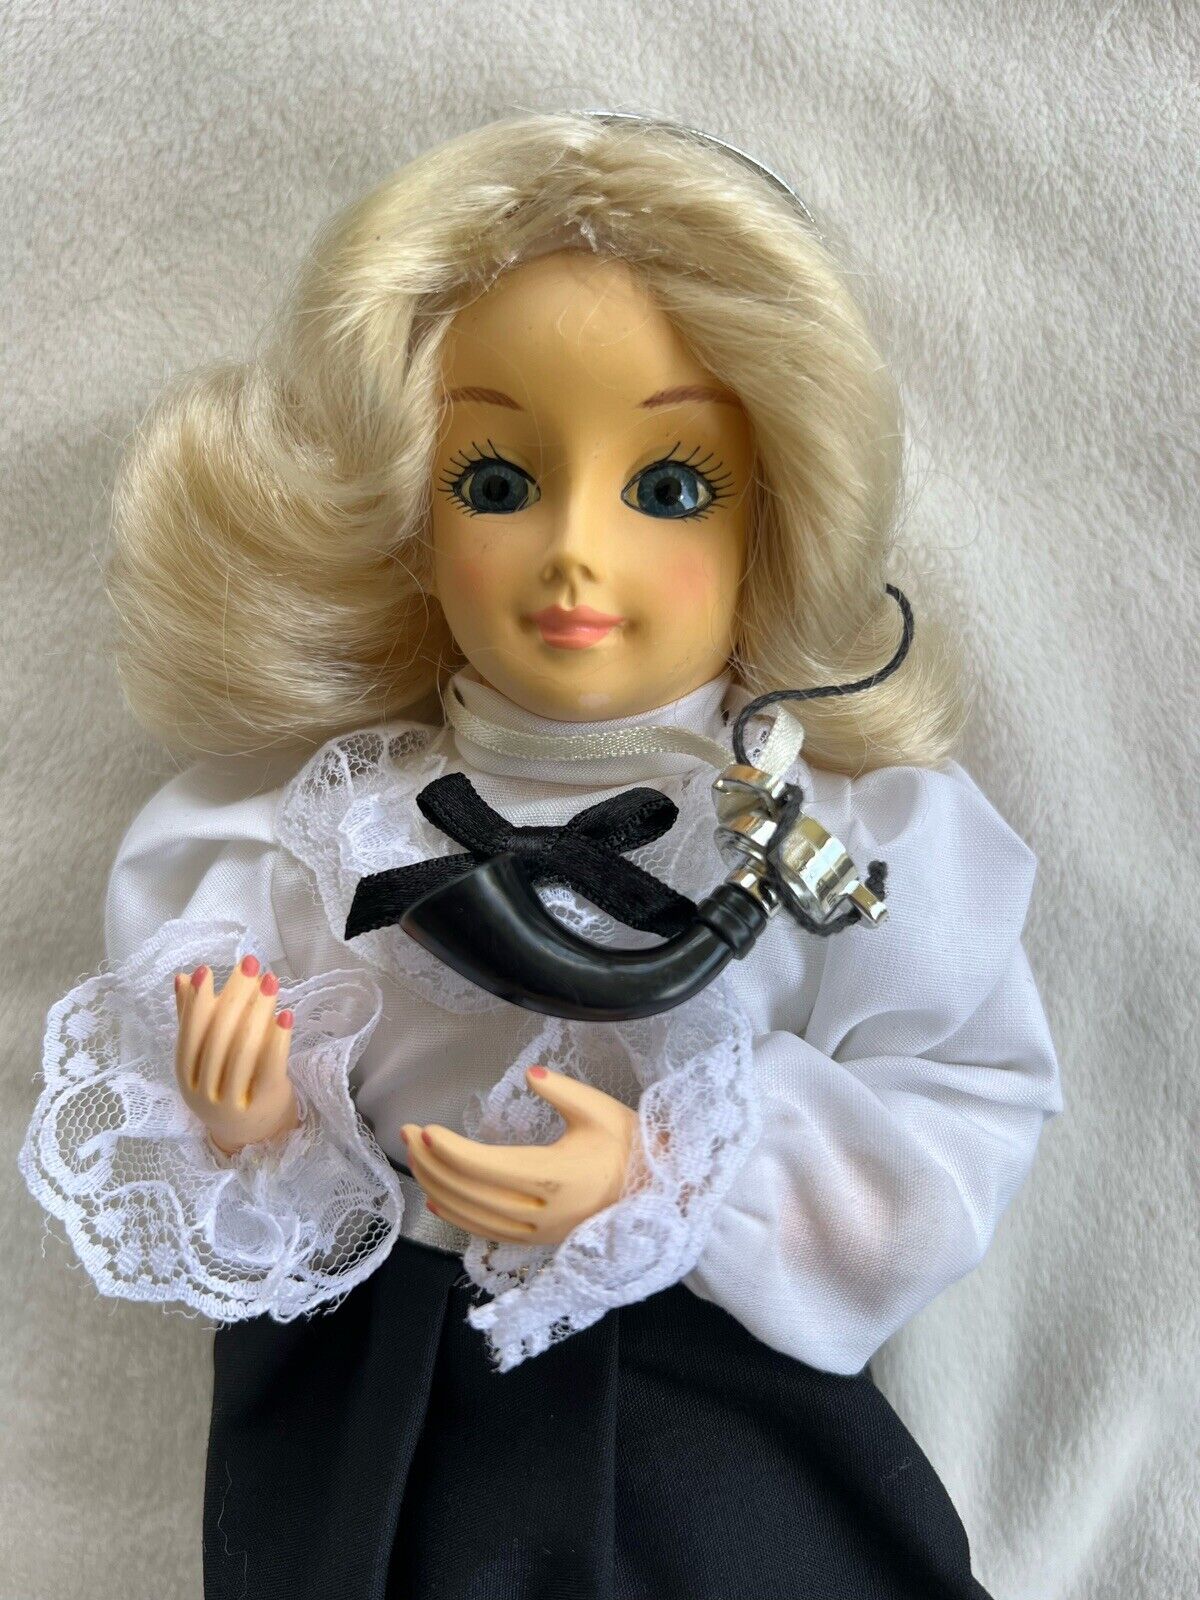 1890s Vintage Pioneer Women Bell Operator Doll New In Package Limited Edition